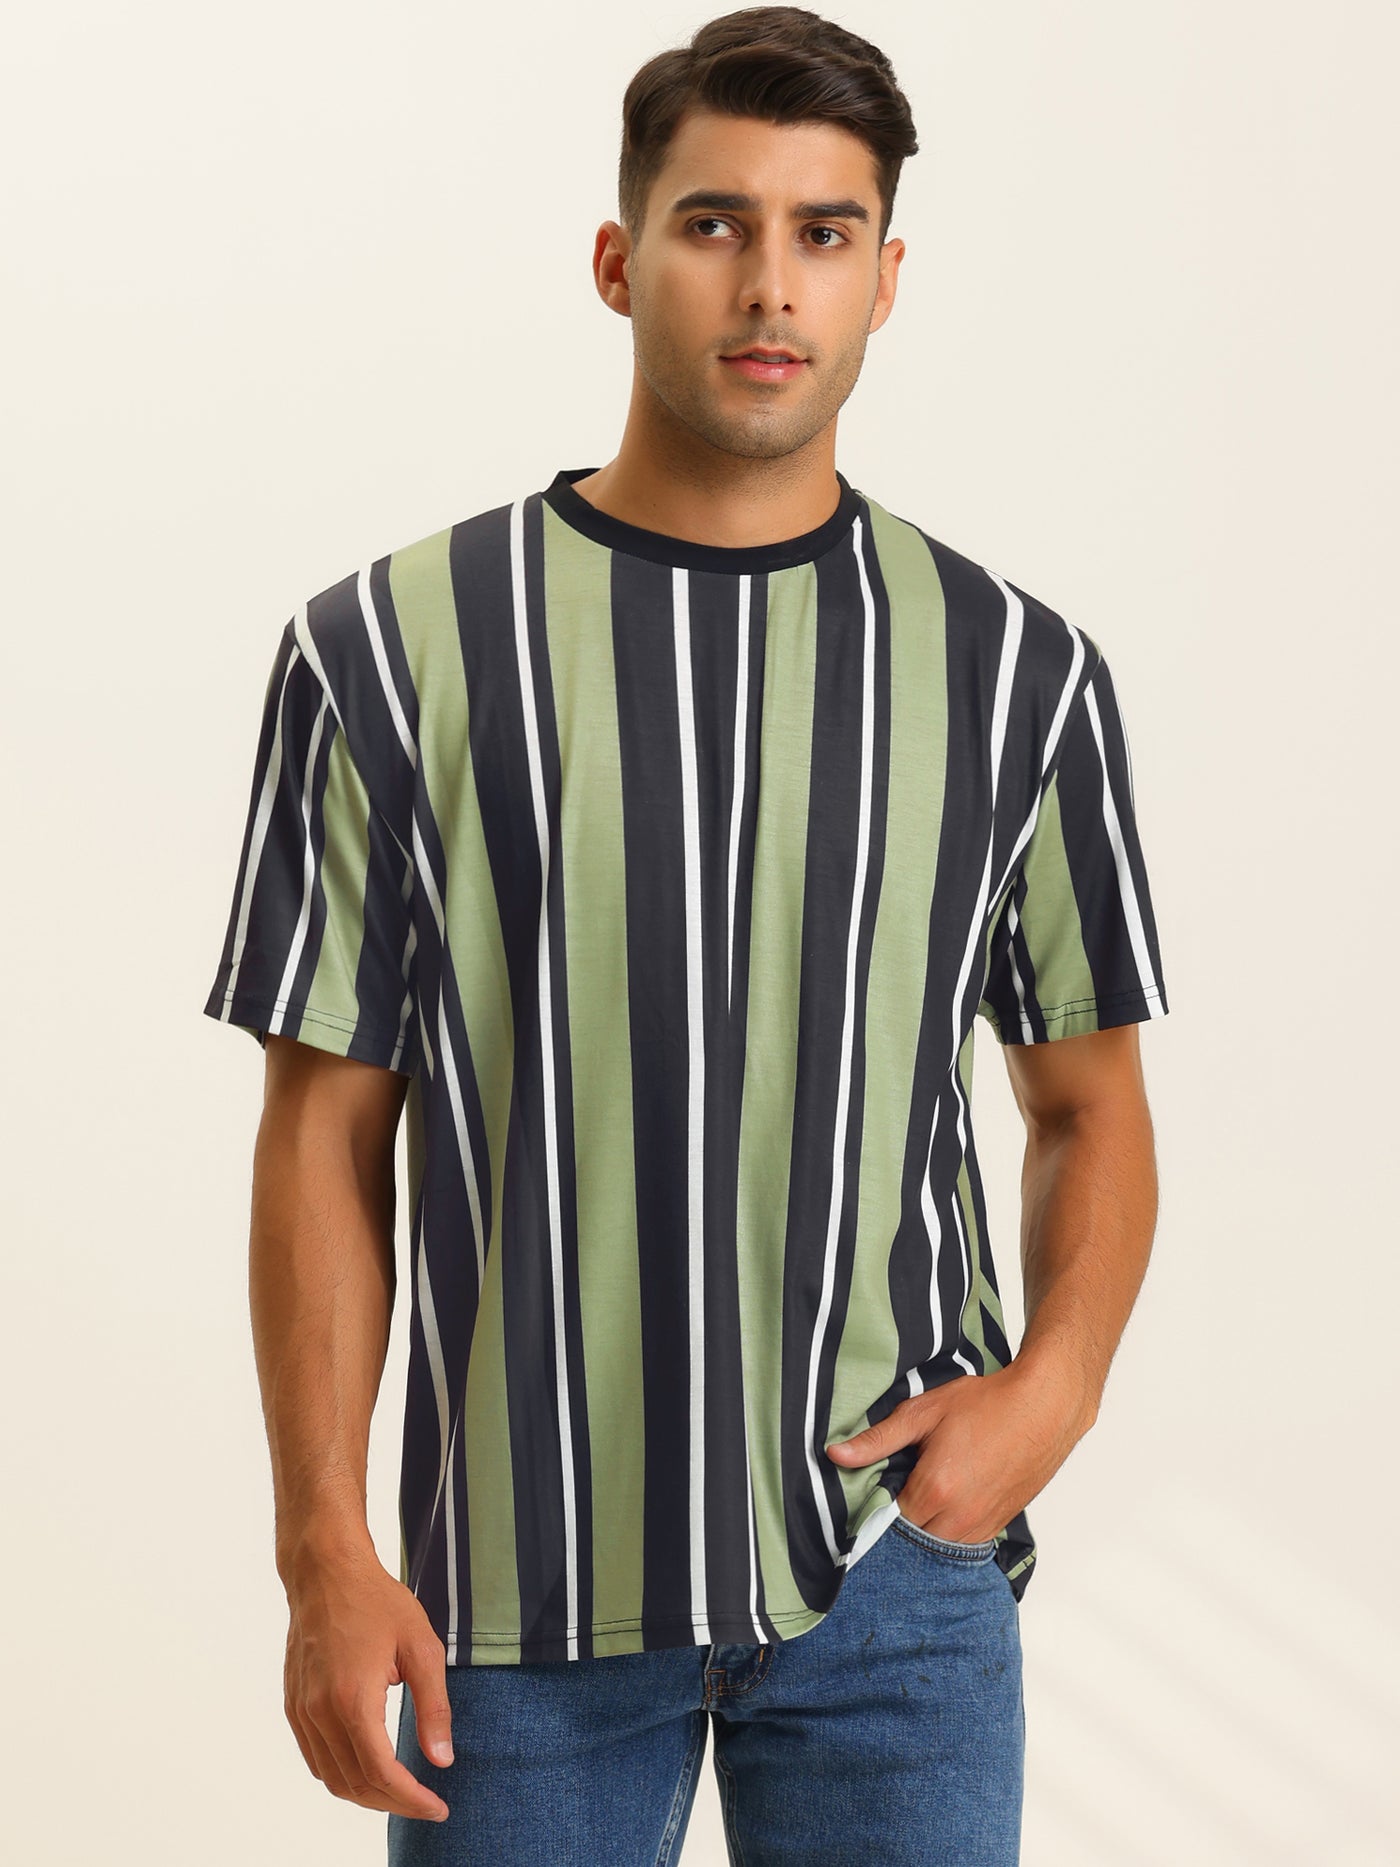 Bublédon Striped T-Shirt for Men's Summer Crew Neck Short Sleeves Stripes Printed Tee Tops